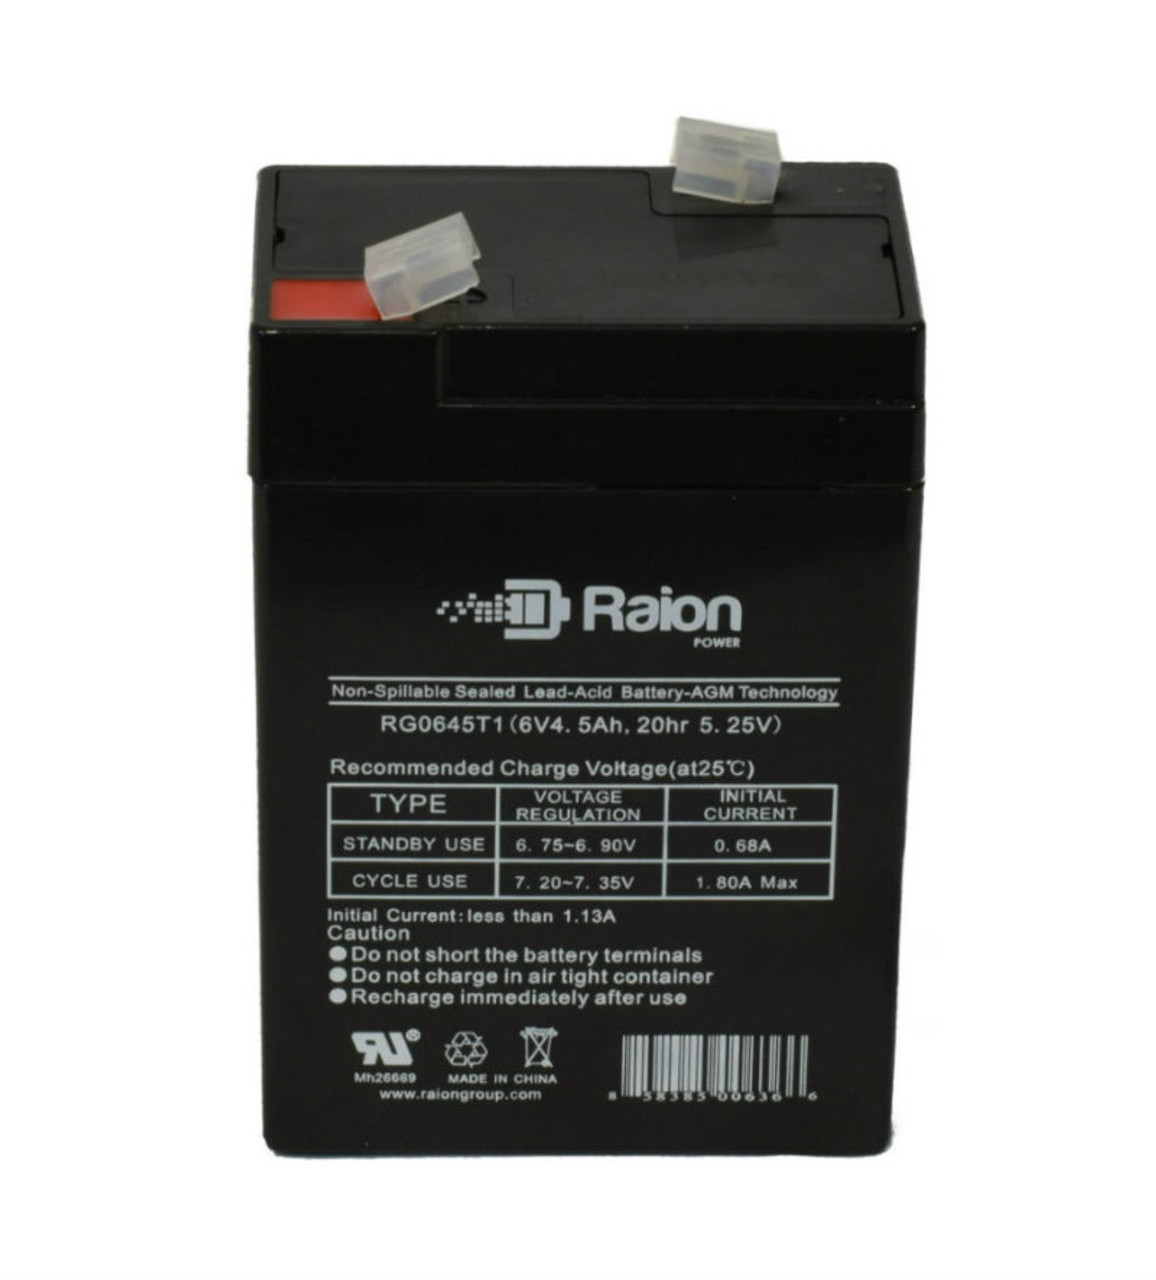 Raion Power RG0645T1 Replacement Battery Cartridge for Criticare Systems 503